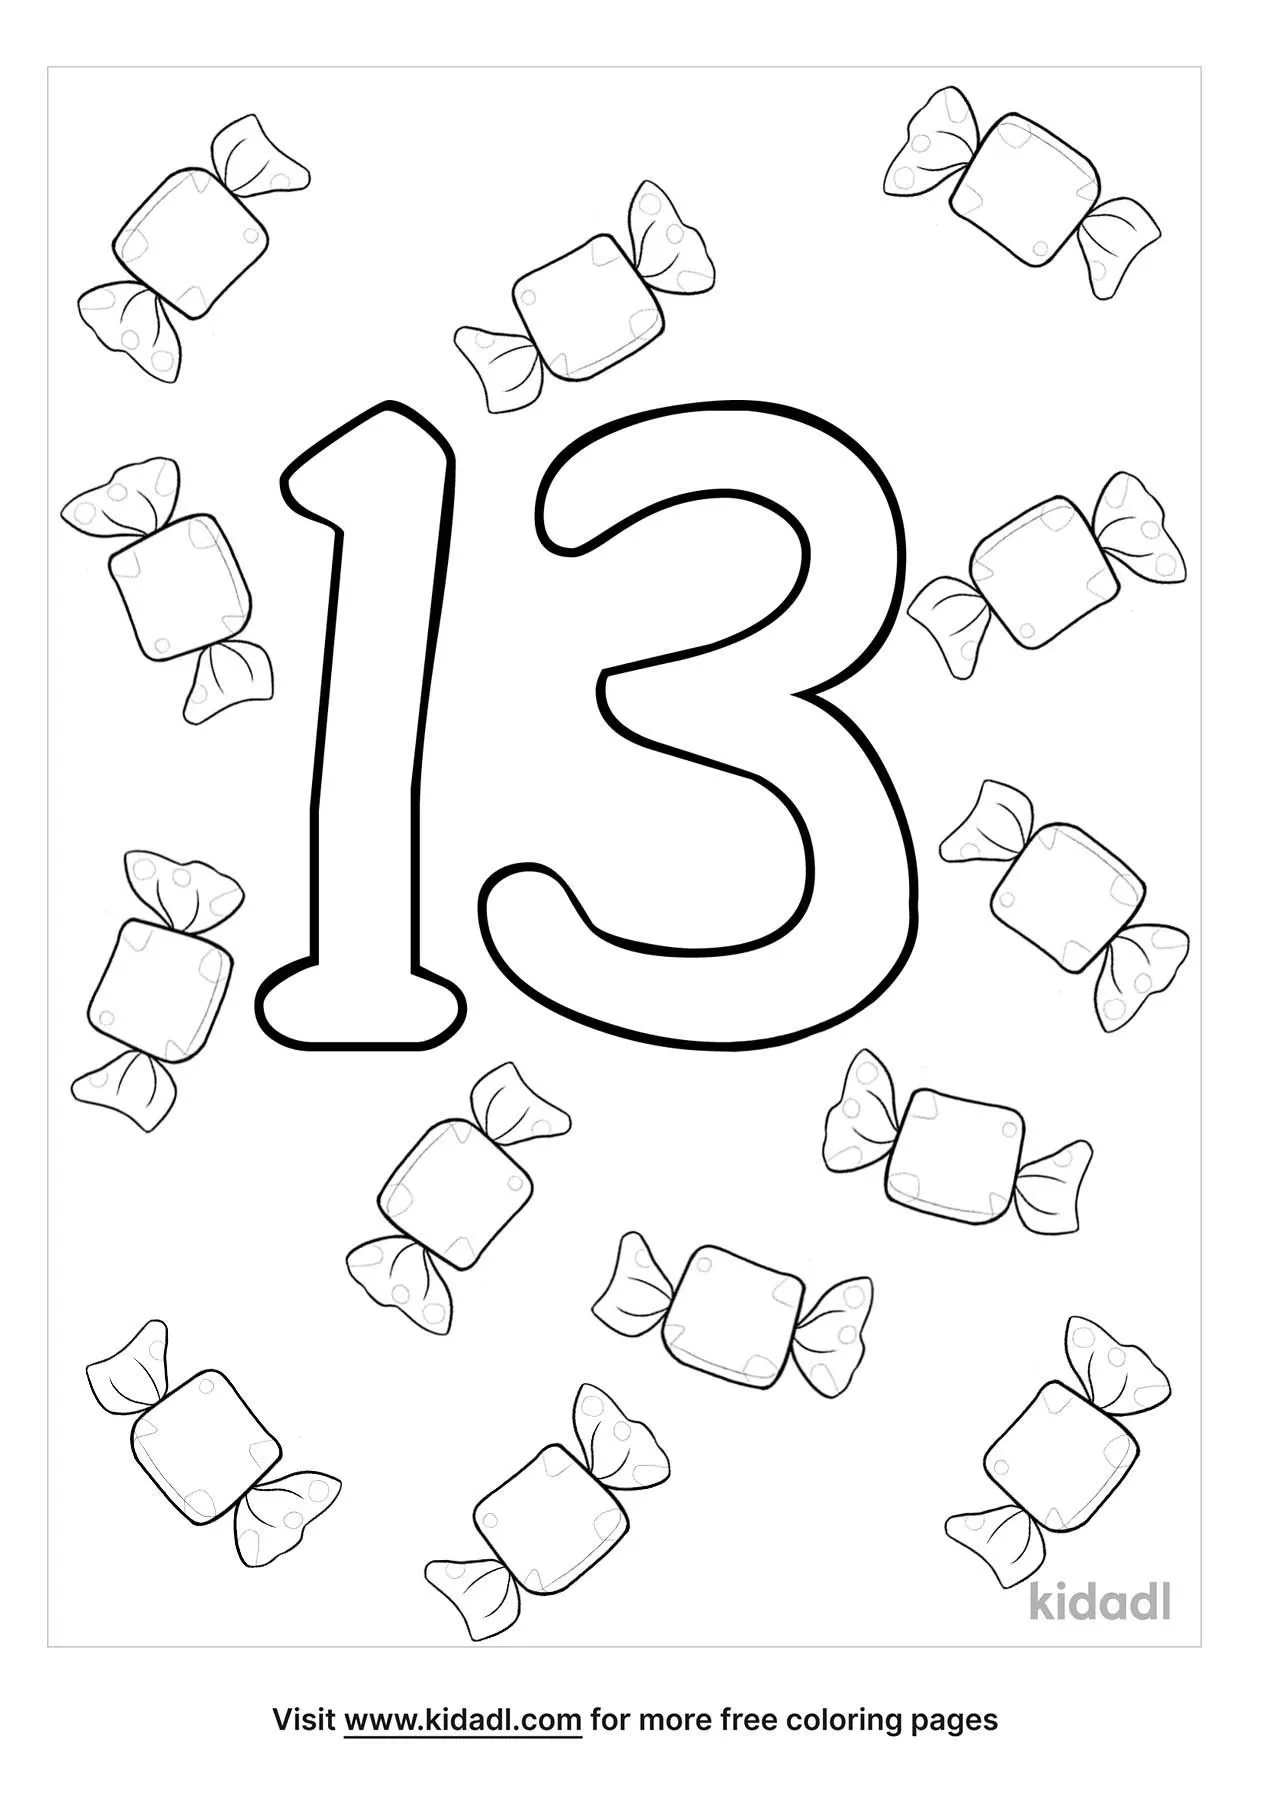 Number 20 Coloring Pages   Free Numbers Coloring Pages   Kidadl